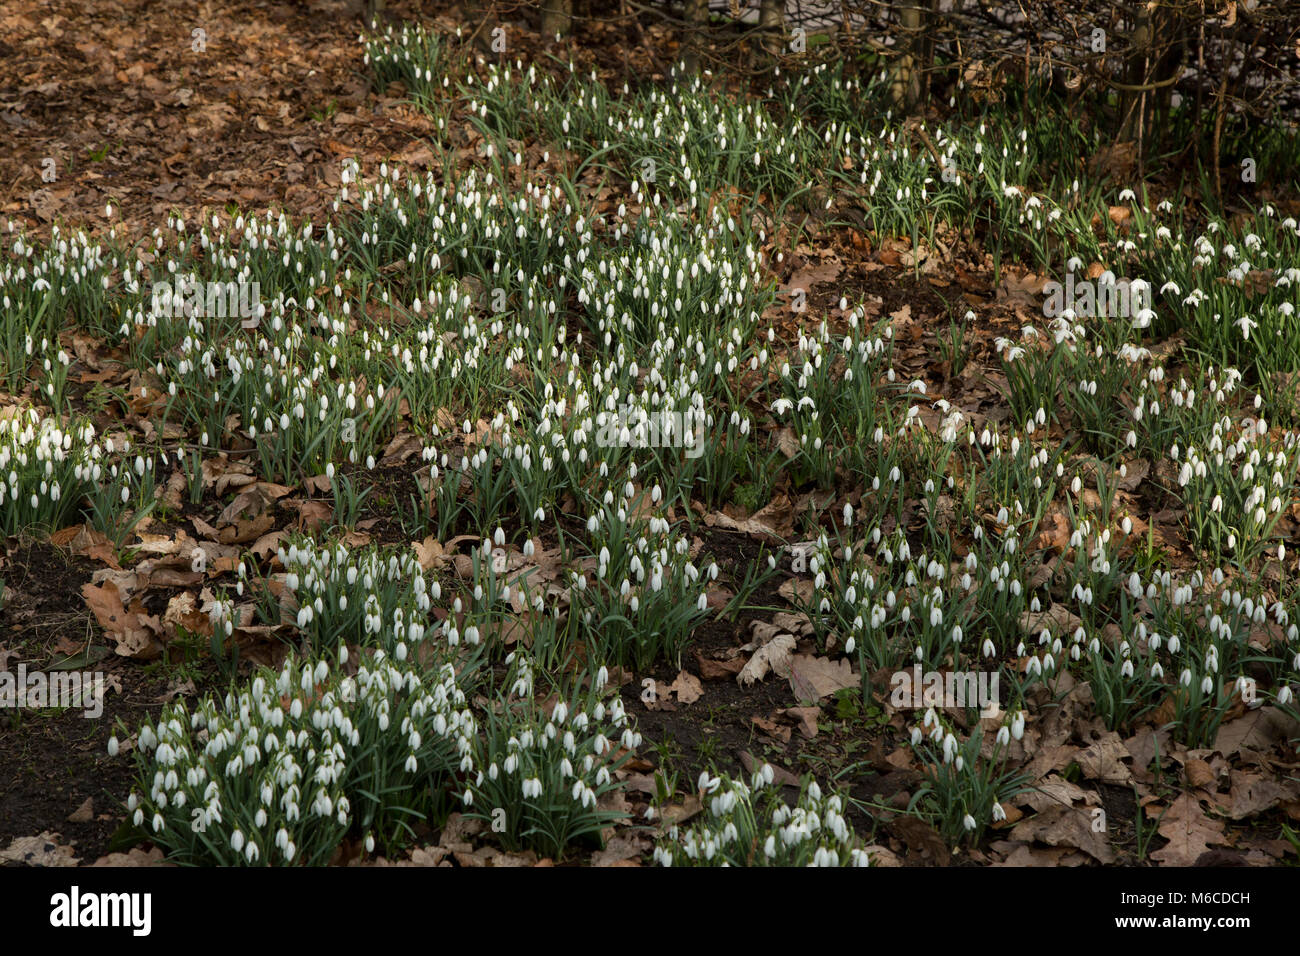 Snowdrops (galanthus) in abundance in a winter flower bed. Stock Photo